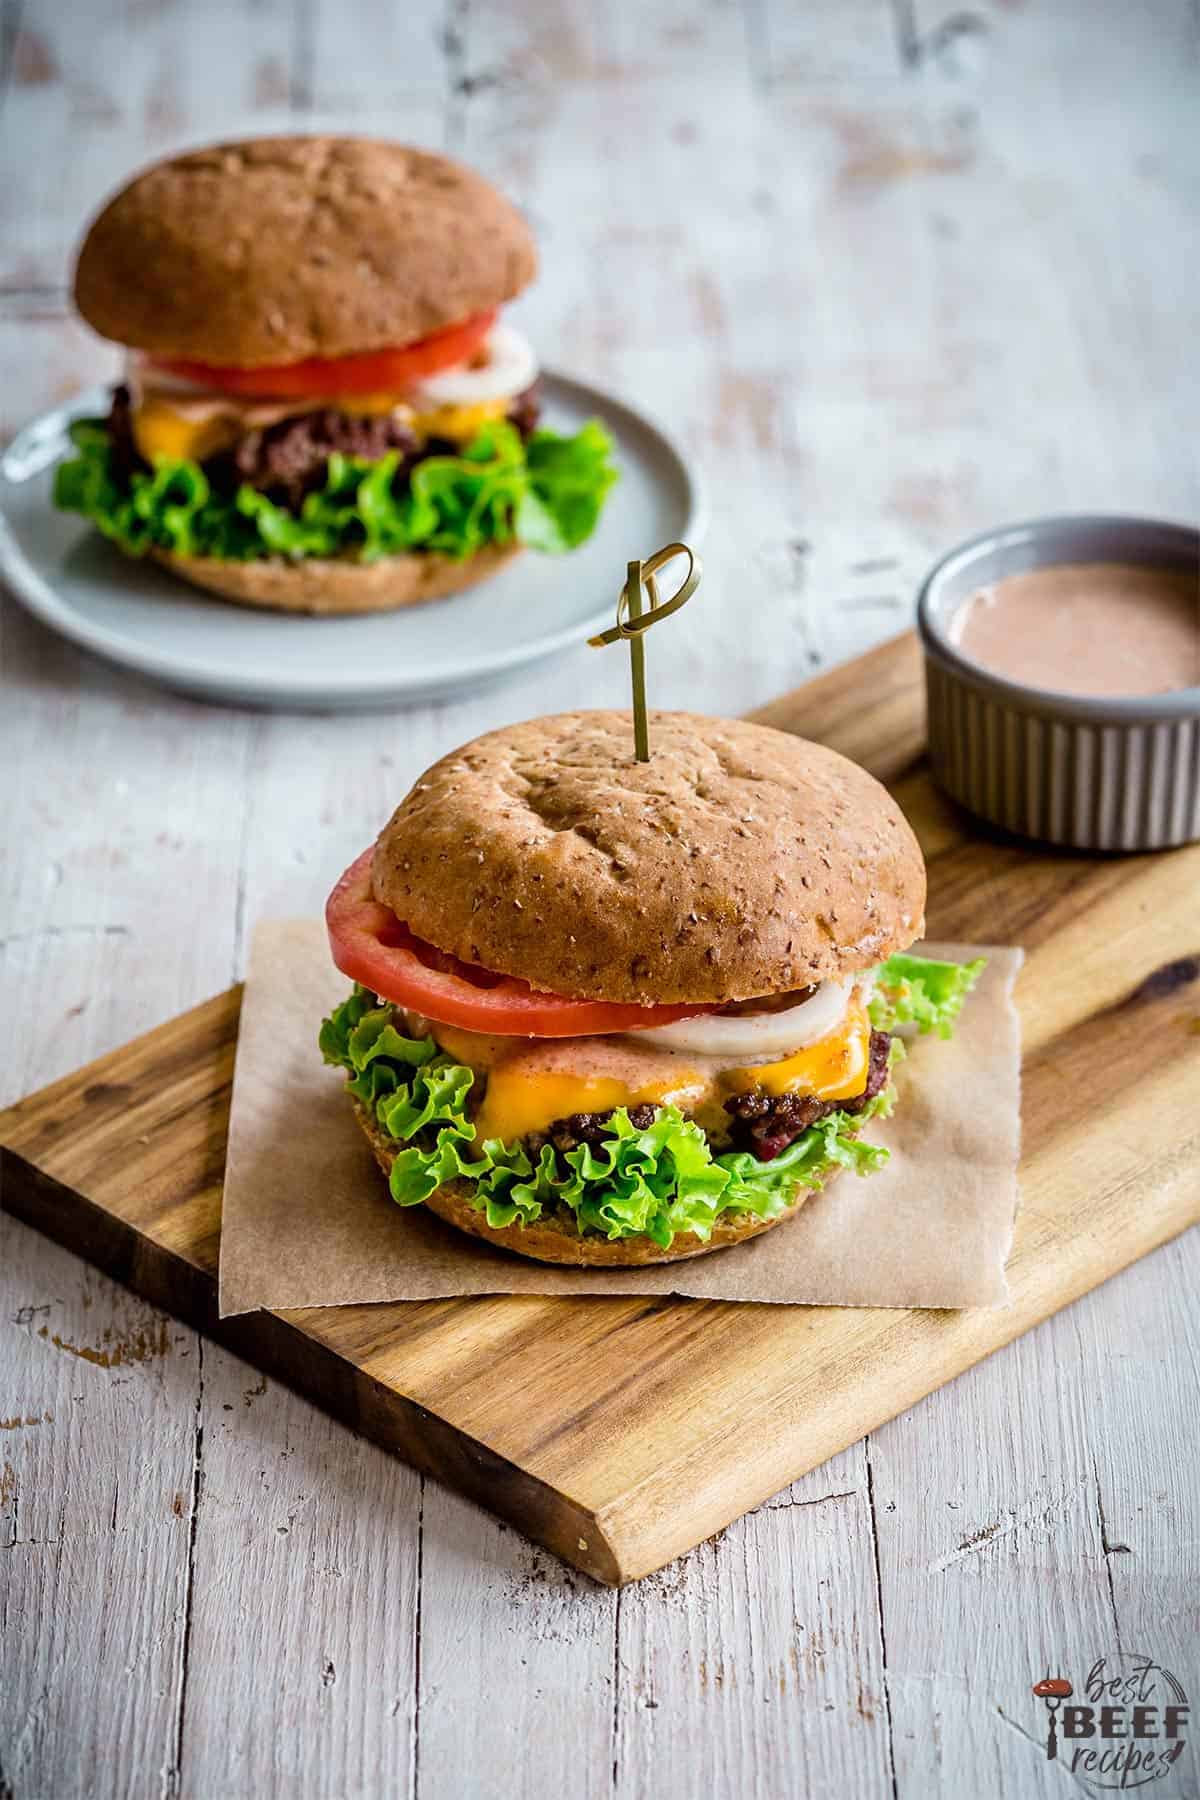 Burger on a bun with lettuce, cheese, tomato and burger sauce.